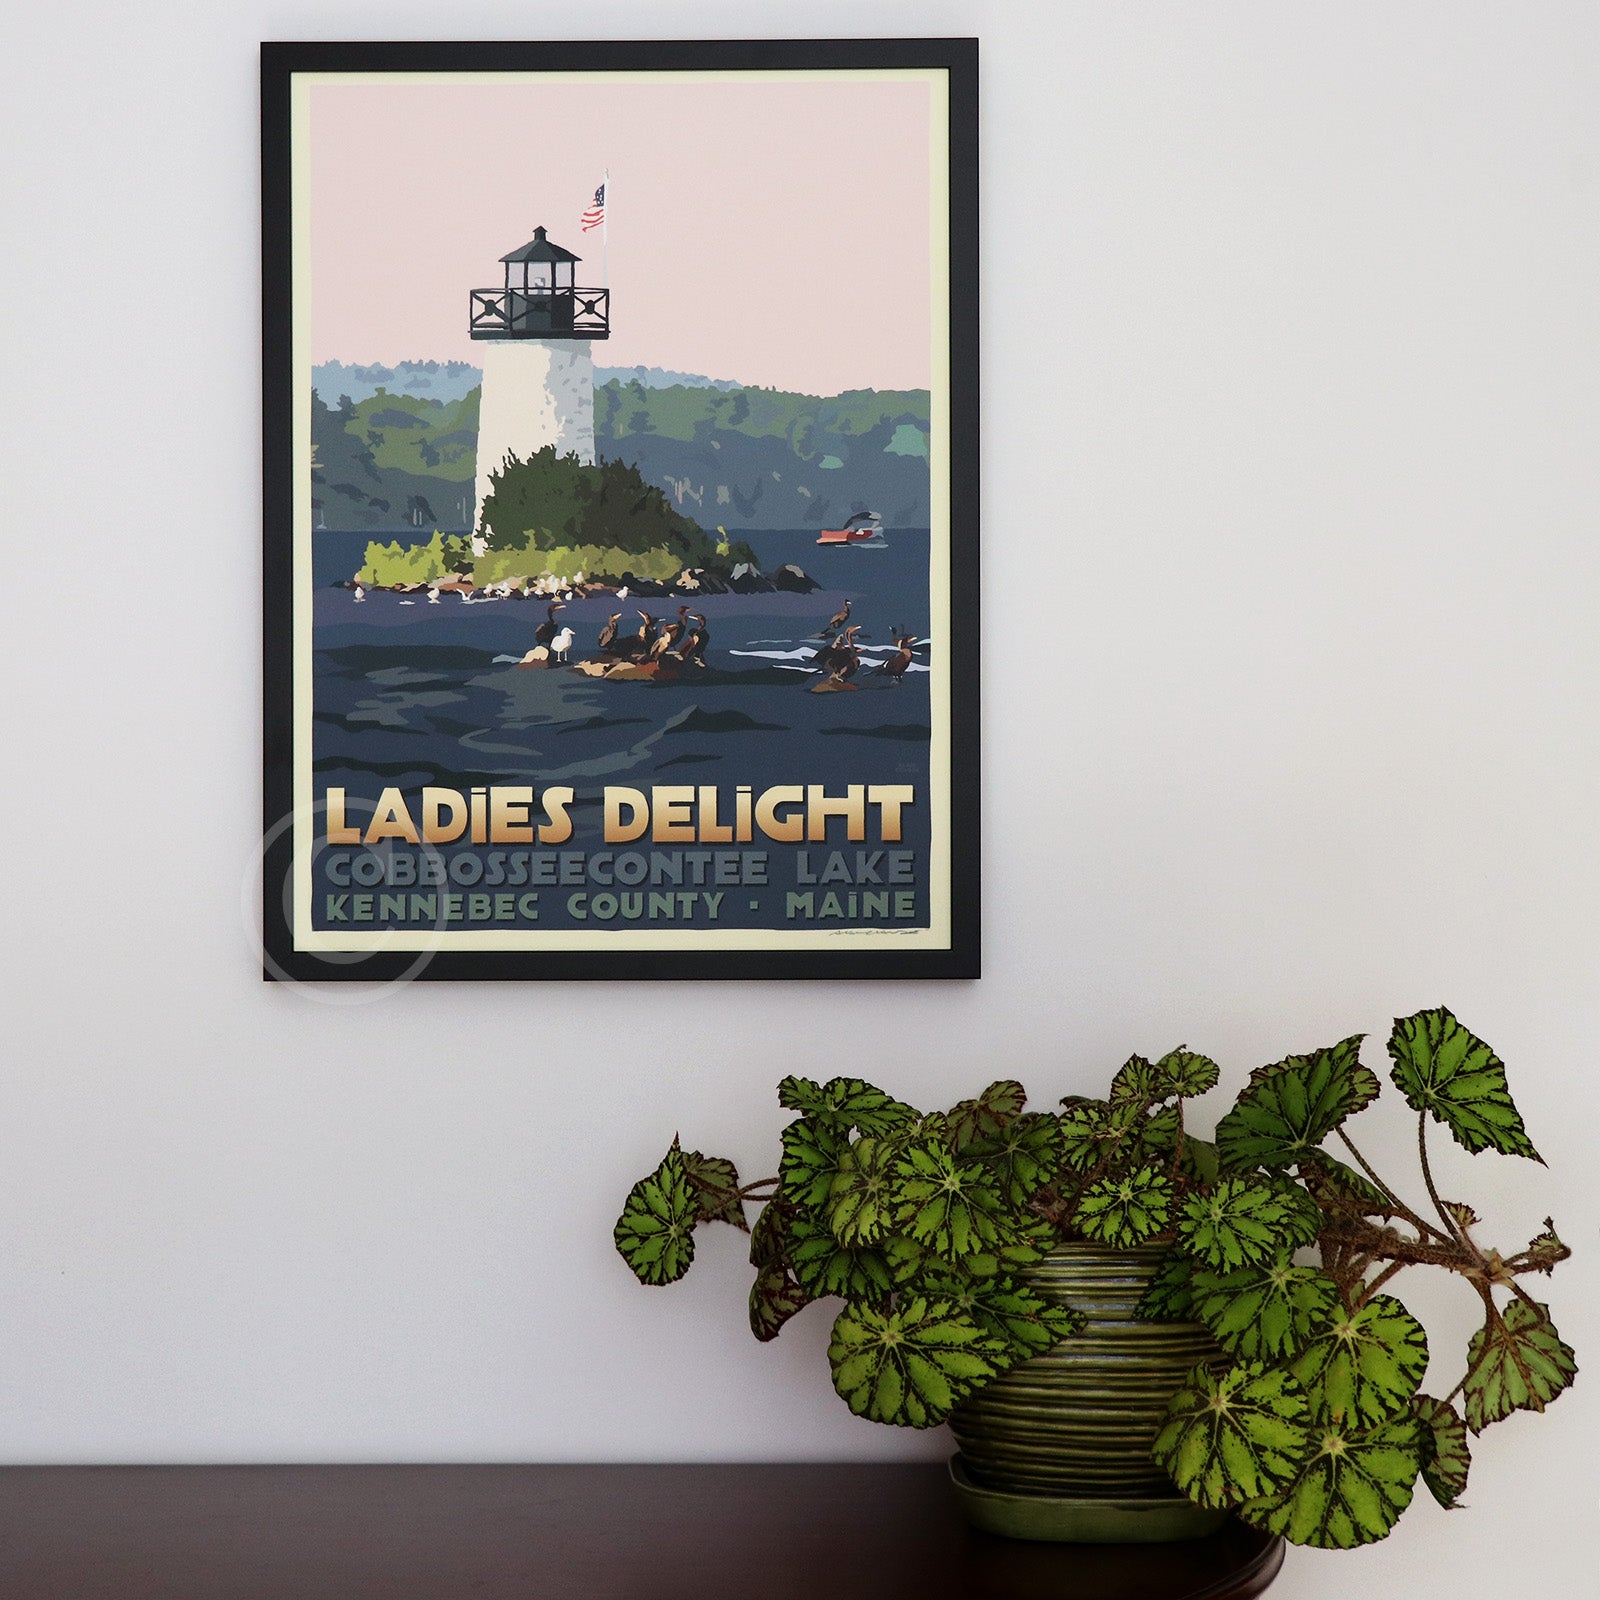 Sunset at Ladies Delight Lighthouse Framed Art Print 18" x 24” Travel Poster By Alan Claude - Maine